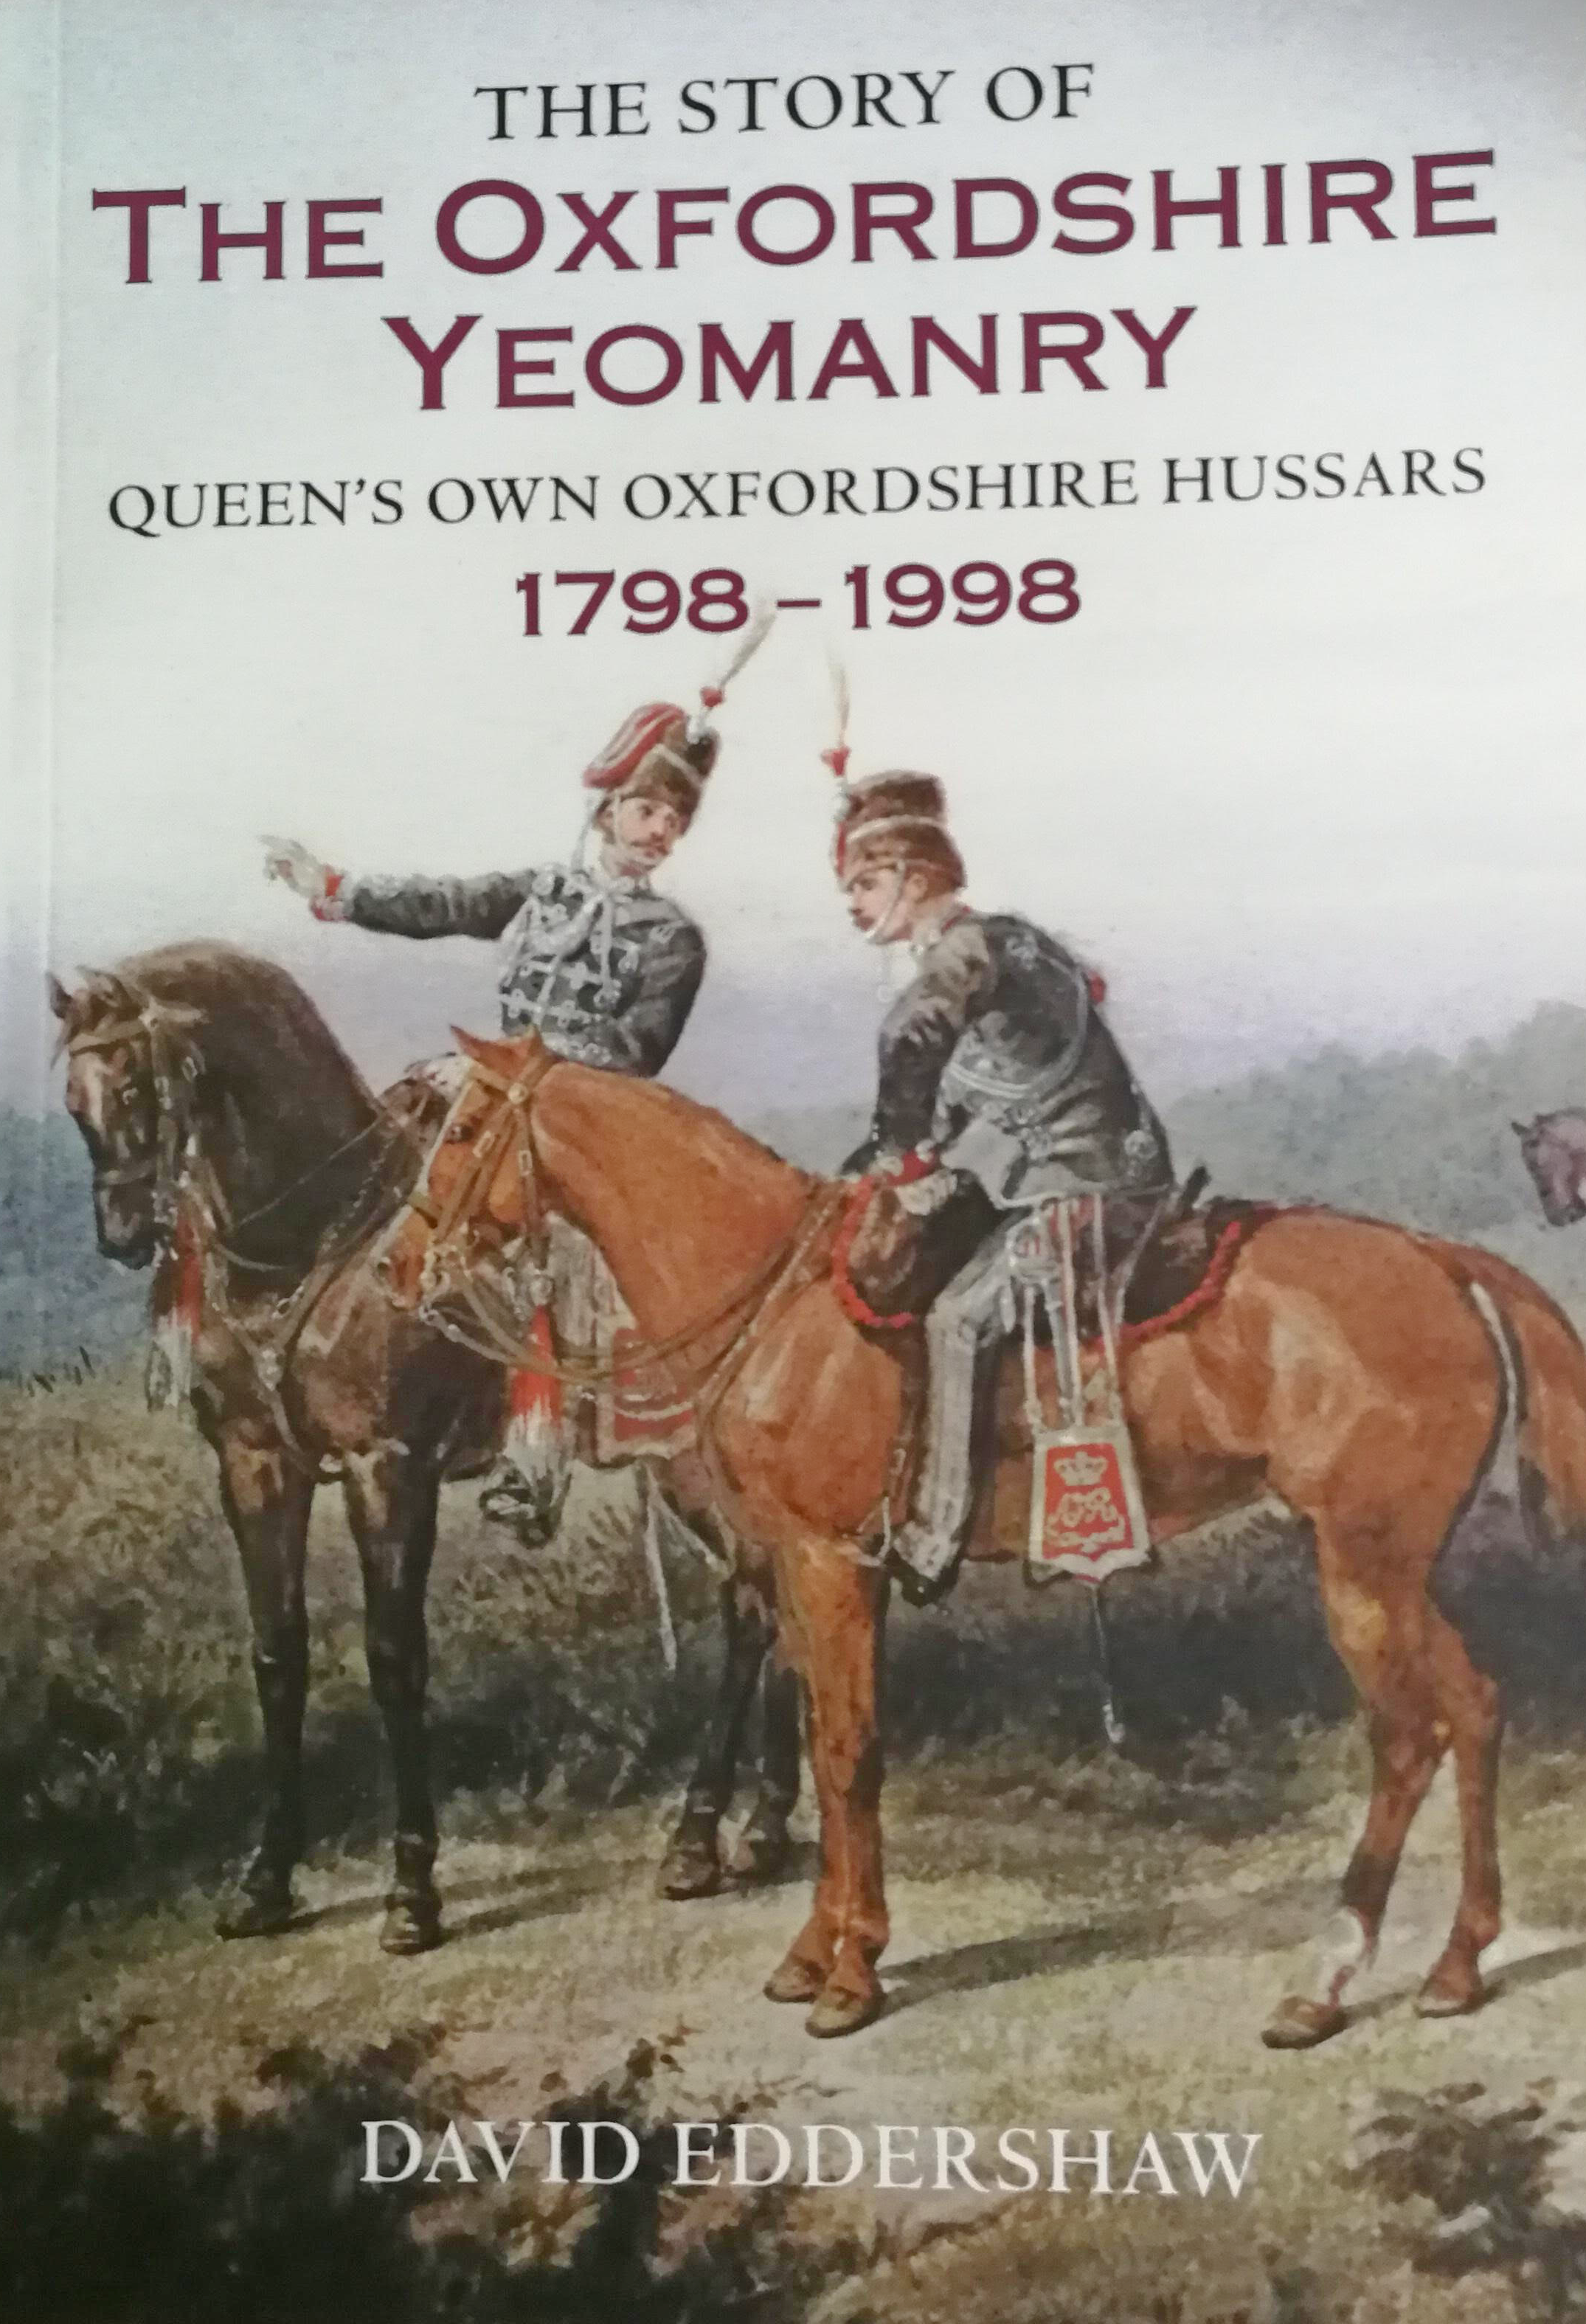 The Story of the Oxfordshire Yeomanry – Queen’s Own Oxfordshire Hussars 1798-1998